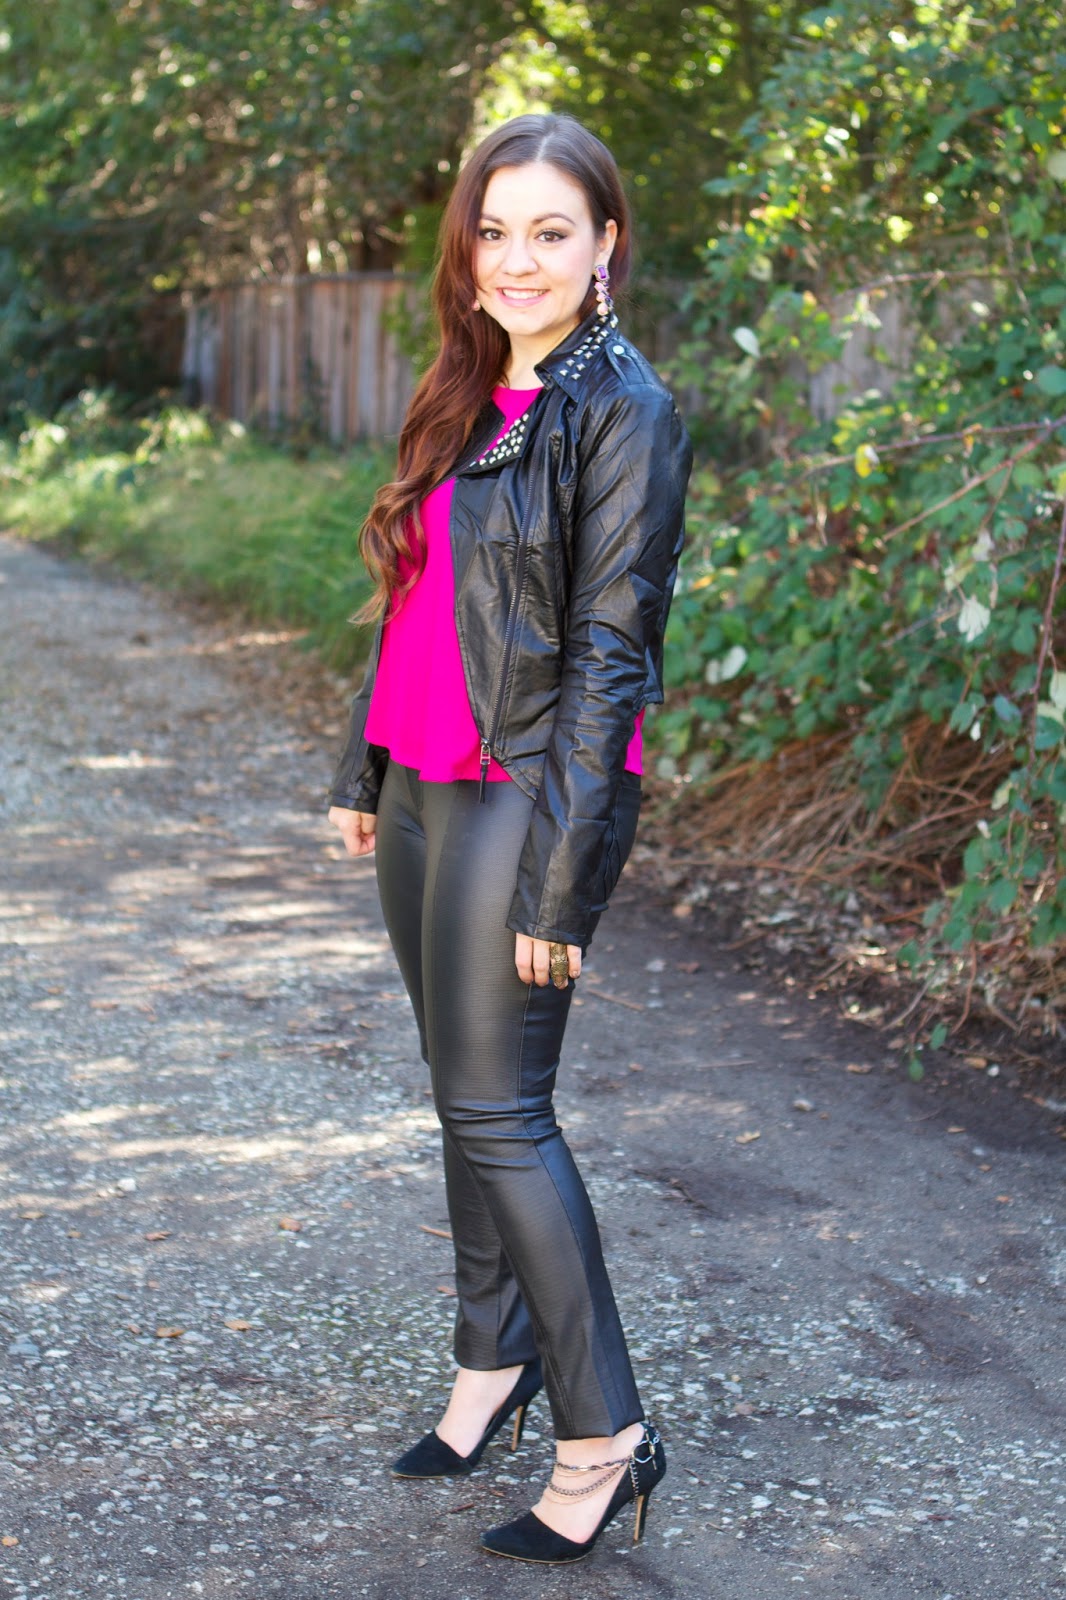 SF Bay Area Fashion & Style Blog - Studded moto jacket, leather pants, magenta top, purple stone earrings, shoe jewelry - Blue Vanilla + Red Stripes Boutique